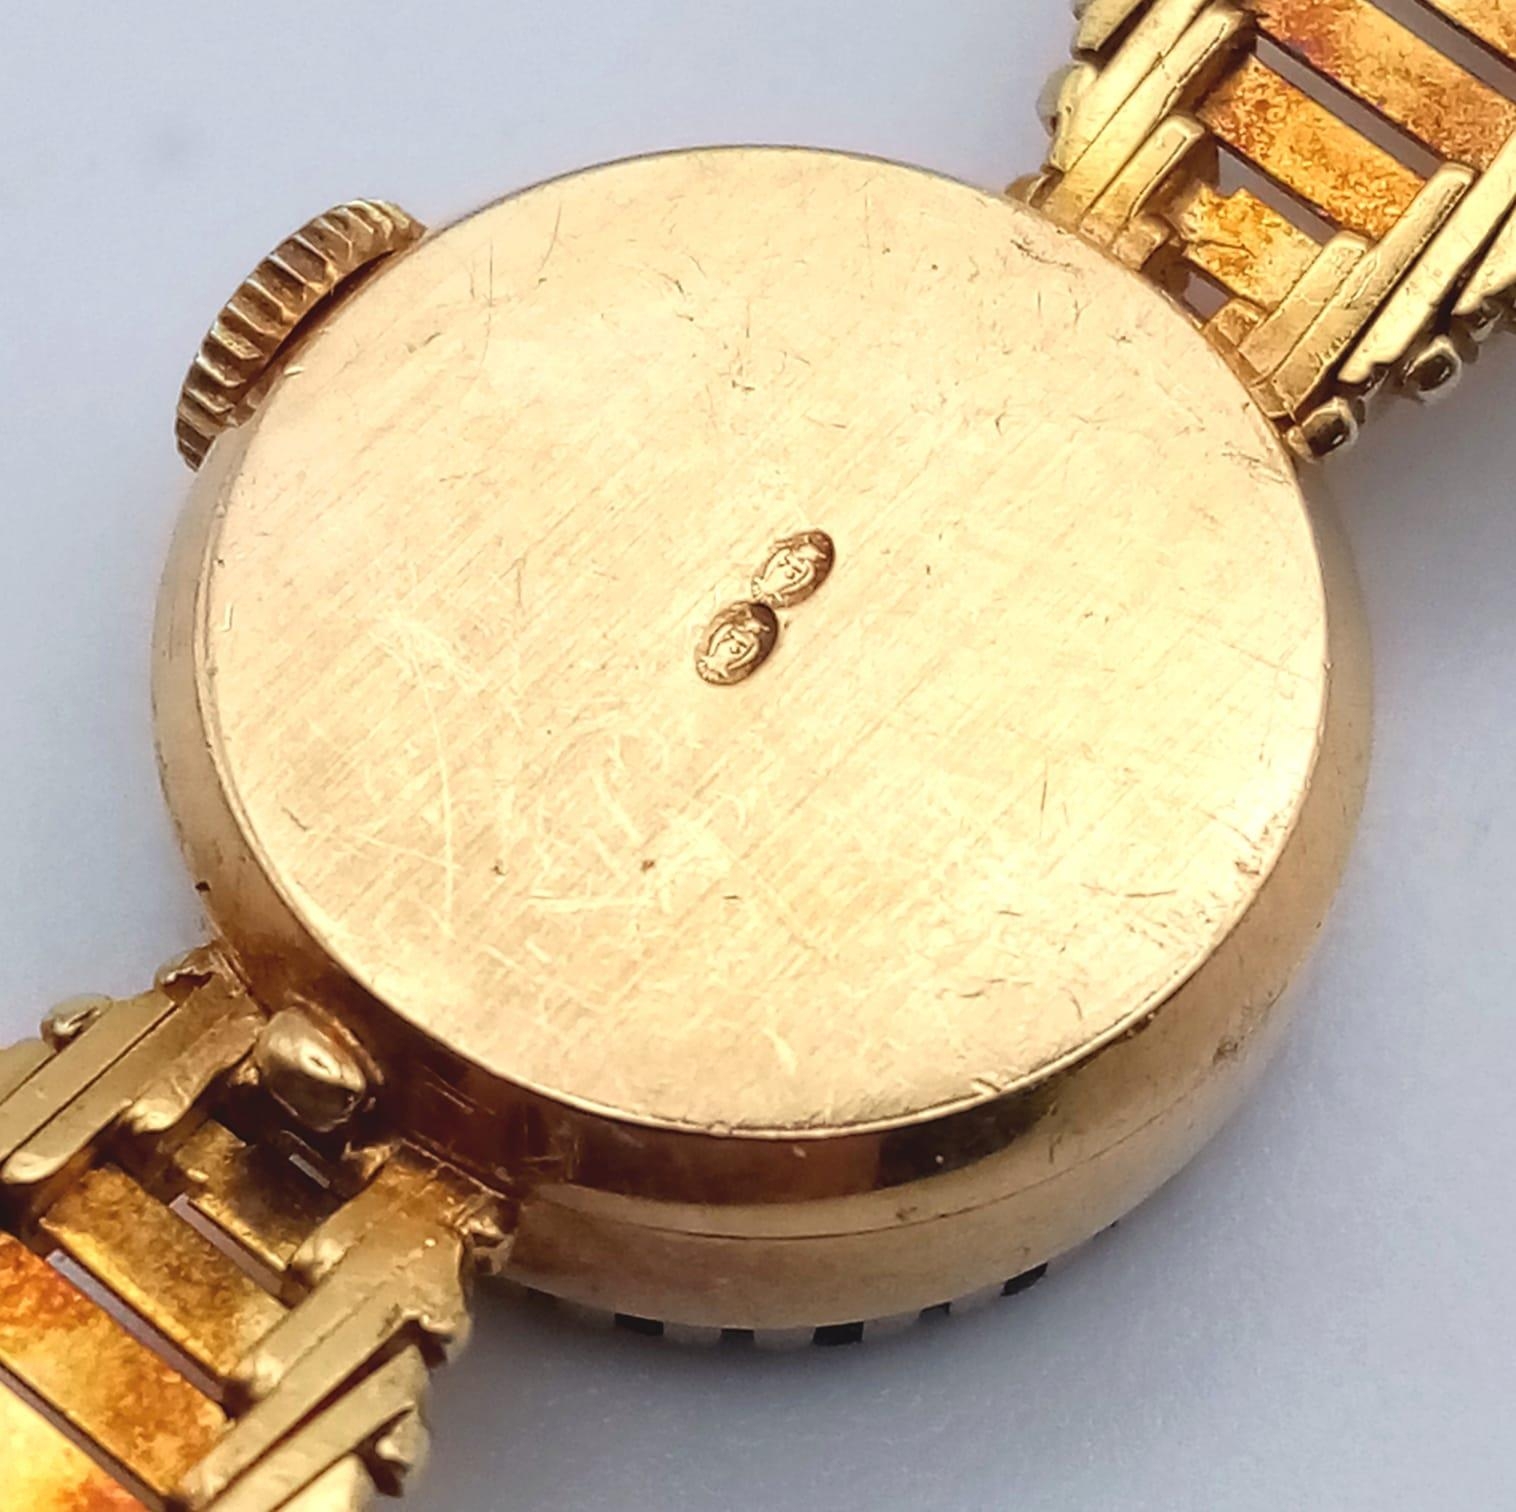 A Vintage Patek Phillipe 18k Gold and Diamond Ladies watch. Gold bracelet and case - 16mm - Image 10 of 13